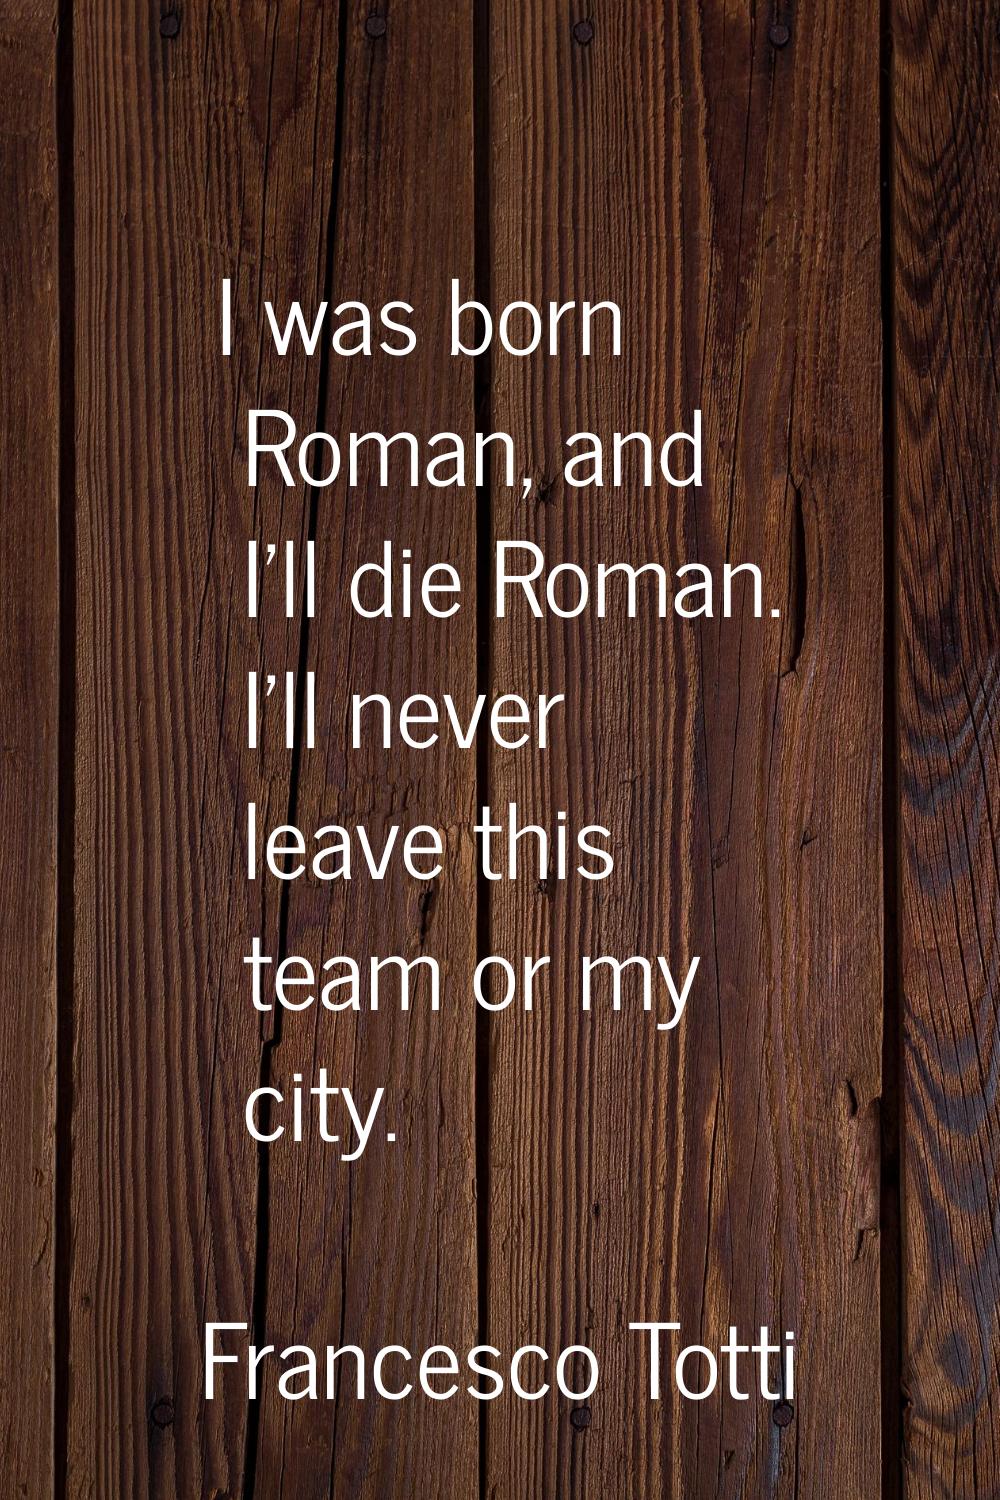 I was born Roman, and I'll die Roman. I'll never leave this team or my city.